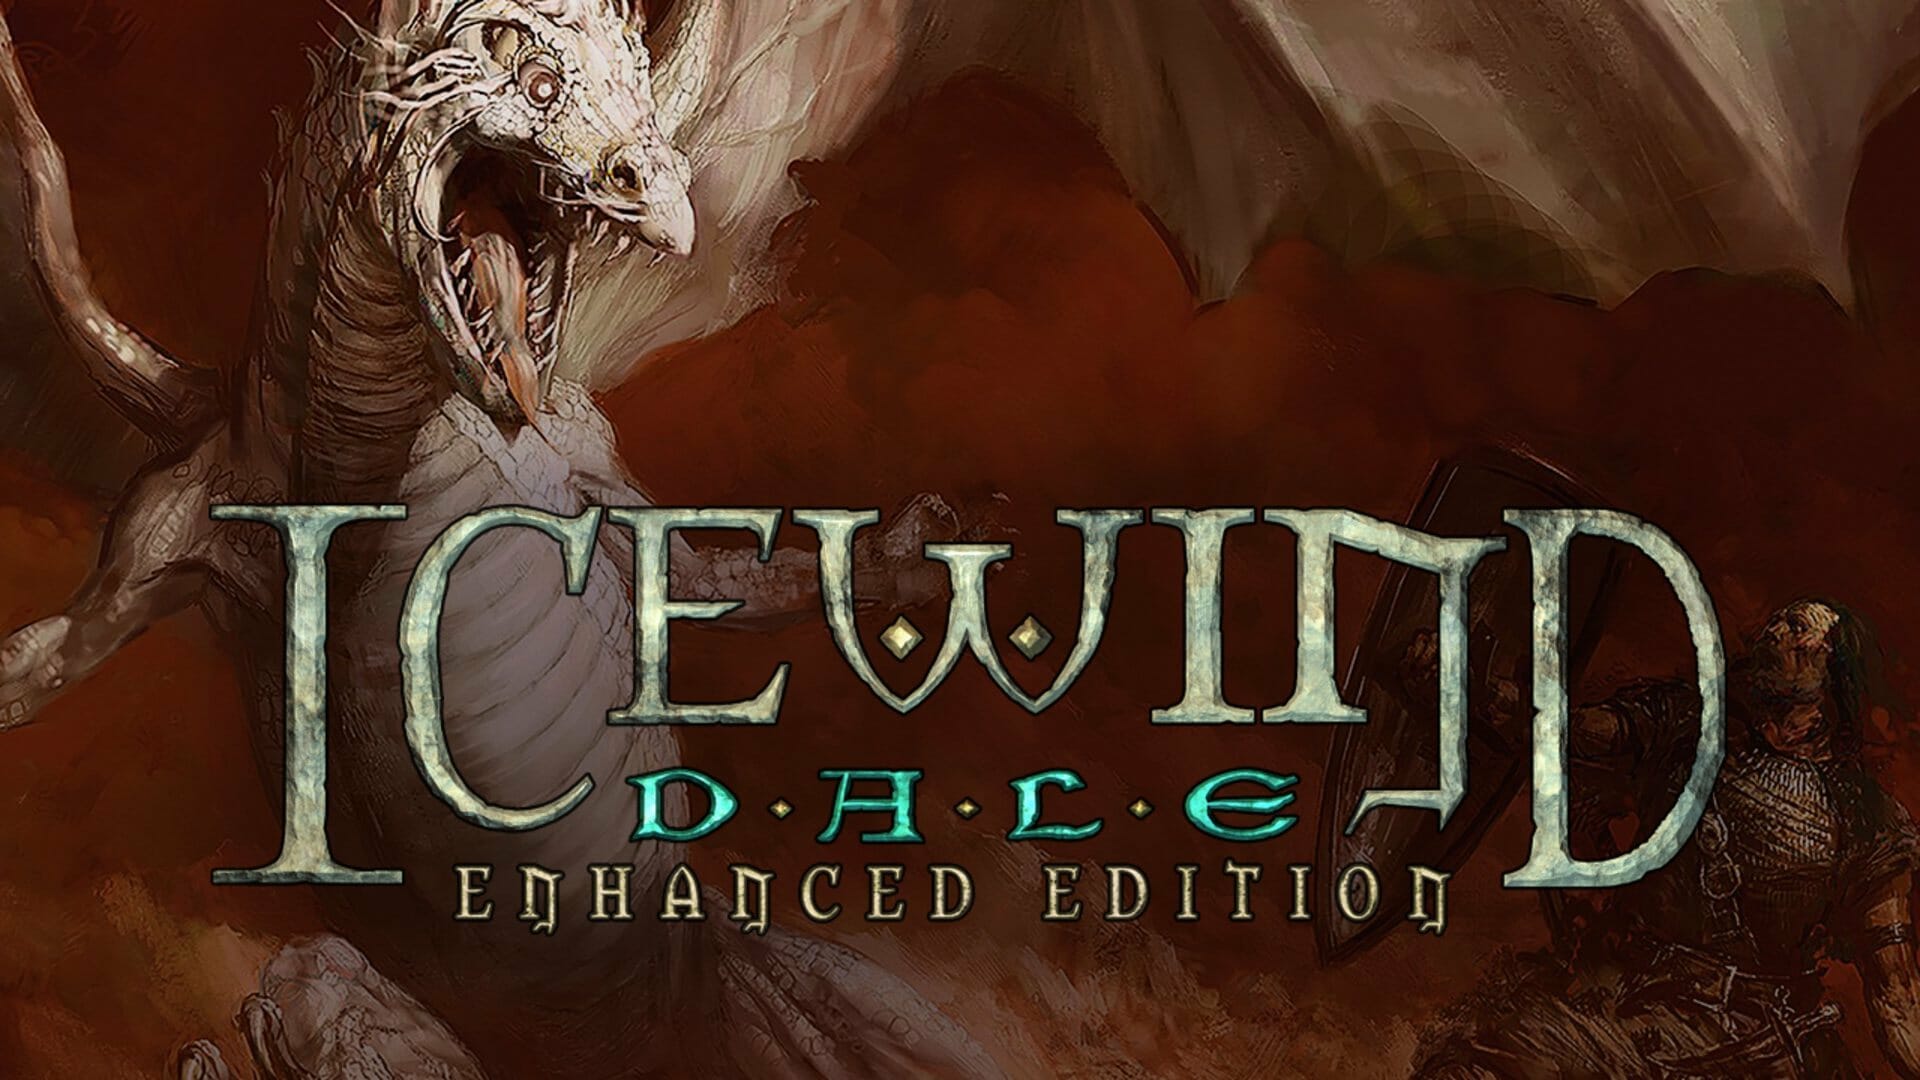 If you want to learn more about Icewind Dale, then the computer game is one first-hand way to do that.